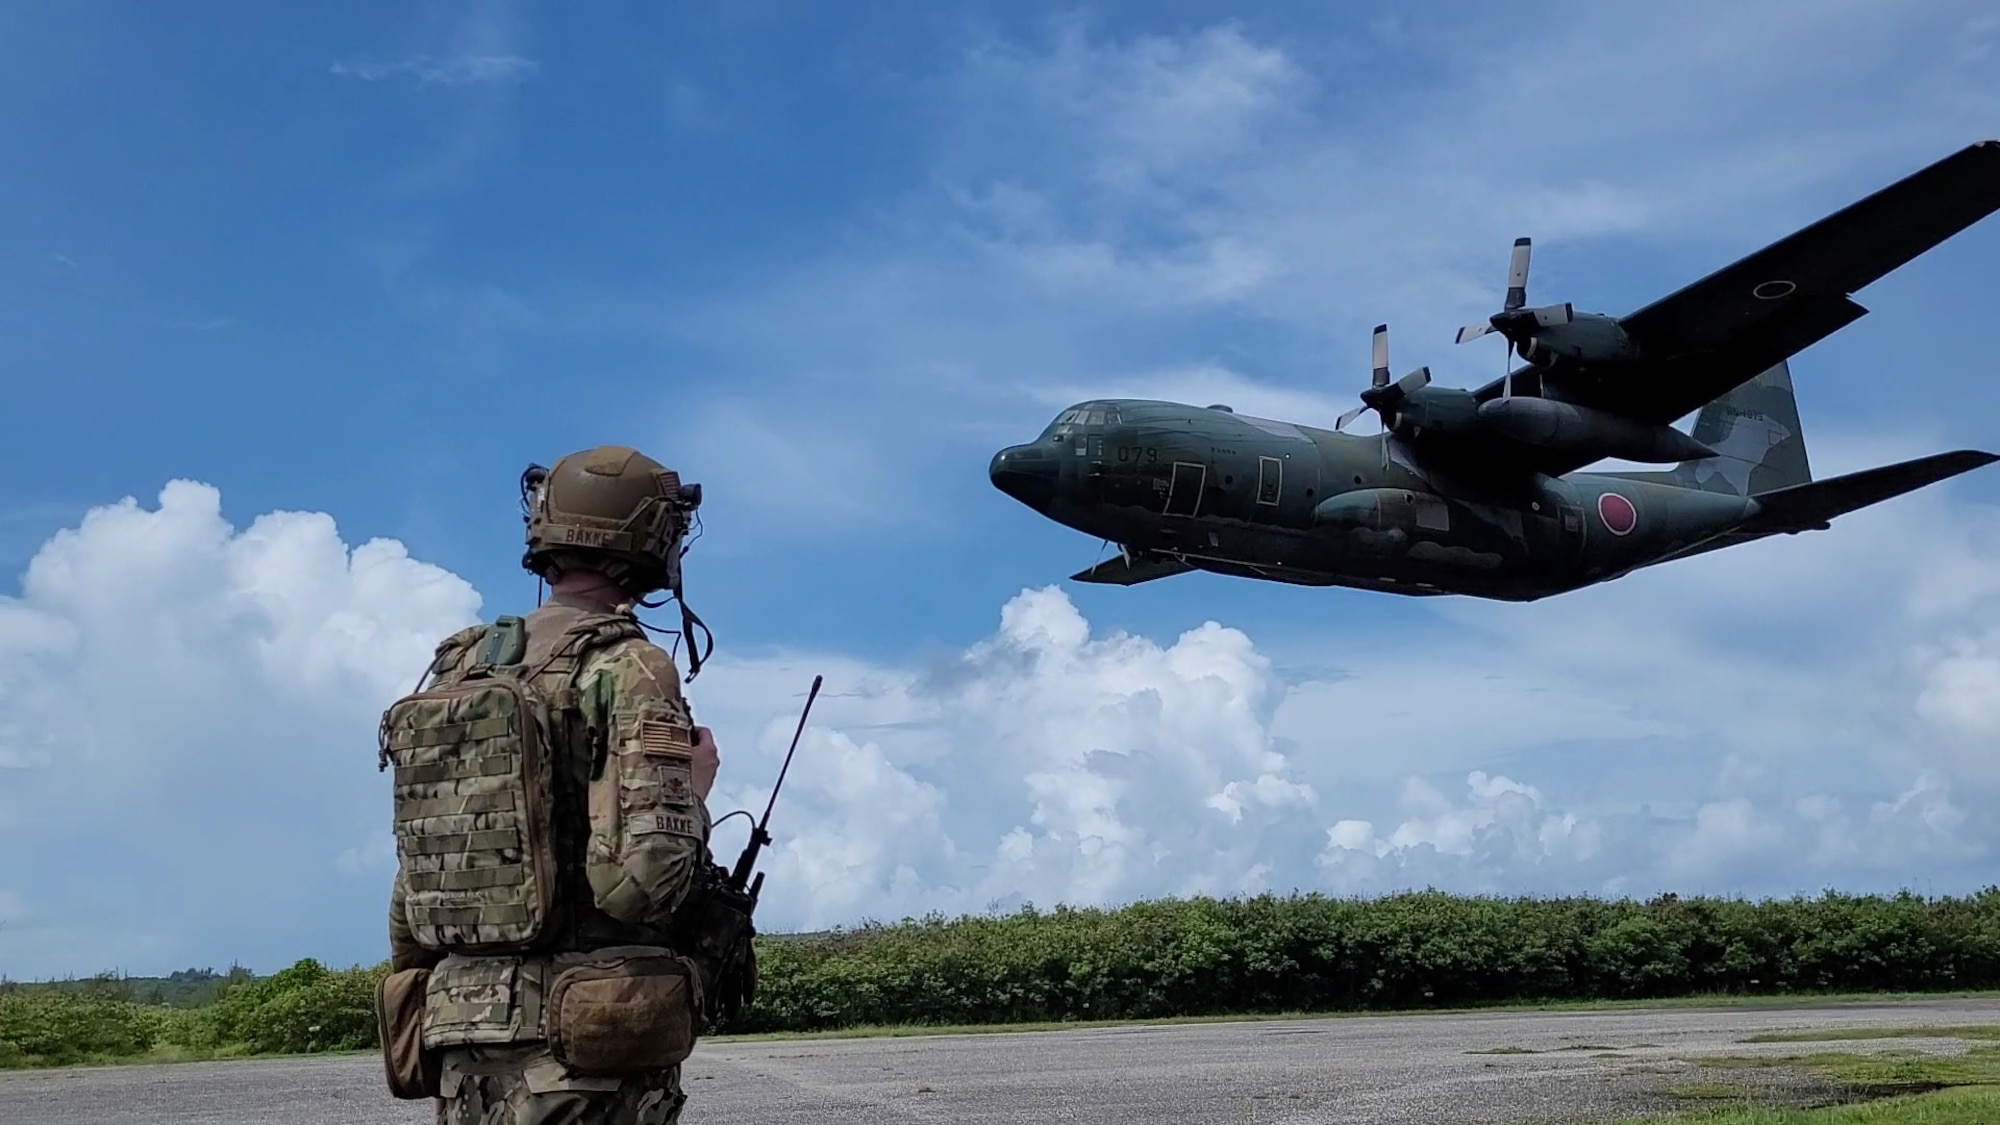 U.S. Air Force Maj. Michael Bakke from the 621st Mobility Support Operations Squadron, Joint Base McGuire-Dix-Lakehurst, New Jersey, prepares as a Japanese C-130 lands on Baker Landing Zone in Tinian, U.S. Commonwealth of the Northern Marianas, July 12, 2023. 621st Mobility Support Operations Squadron members, Air Mobility Liaison Officers, Expeditionary Air Ground Liaison Element members, and Japanese loadmasters participated in Mobility Guardian 23, where their mission was to support the coalition landing zone, drop zone operations, and support cargo preparation.